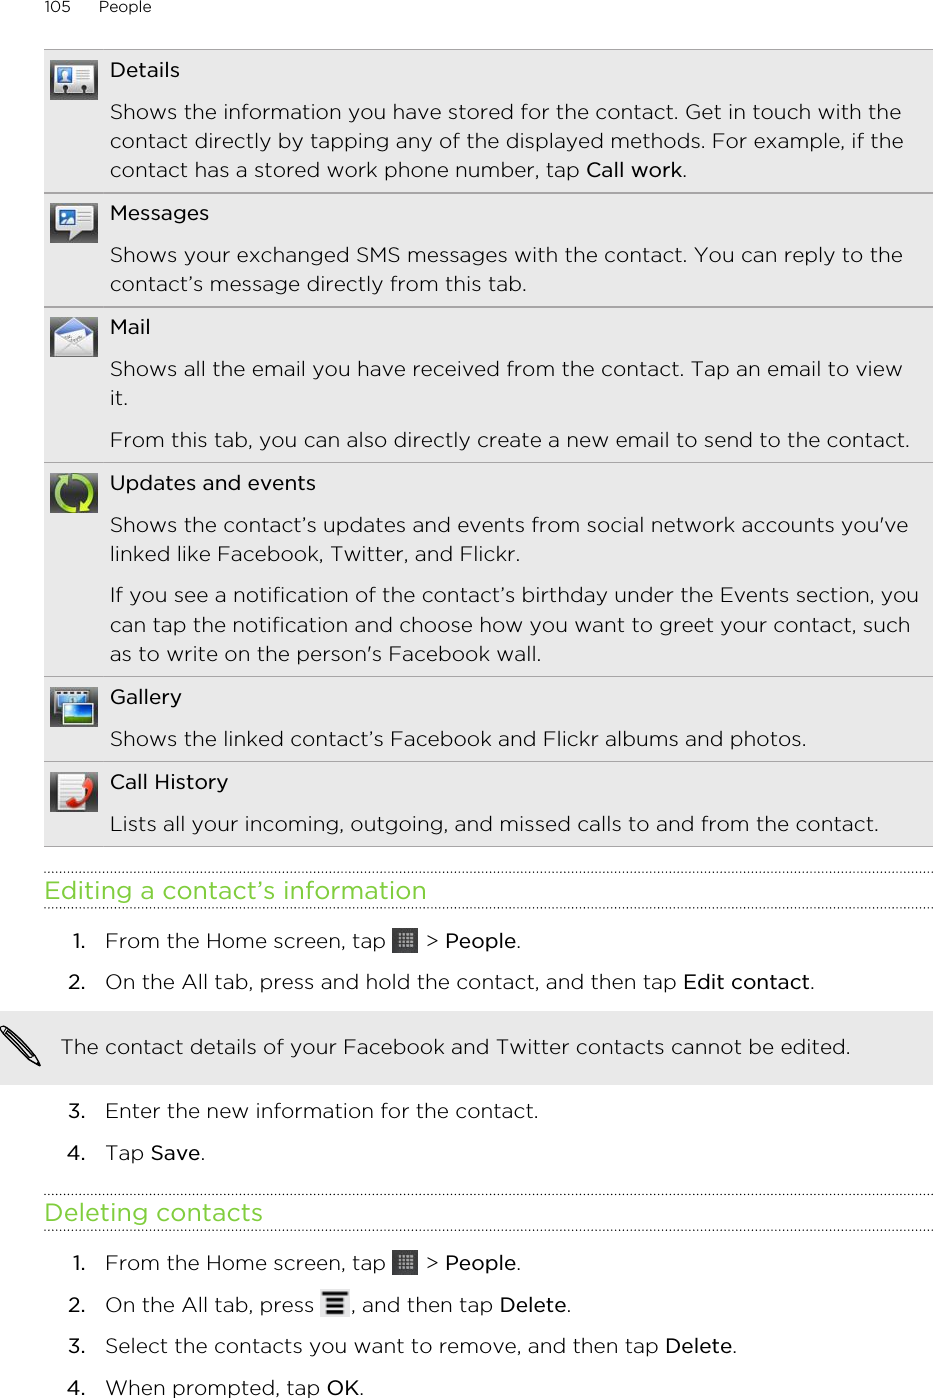 DetailsShows the information you have stored for the contact. Get in touch with thecontact directly by tapping any of the displayed methods. For example, if thecontact has a stored work phone number, tap Call work.MessagesShows your exchanged SMS messages with the contact. You can reply to thecontact’s message directly from this tab.MailShows all the email you have received from the contact. Tap an email to viewit.From this tab, you can also directly create a new email to send to the contact.Updates and eventsShows the contact’s updates and events from social network accounts you&apos;velinked like Facebook, Twitter, and Flickr.If you see a notification of the contact’s birthday under the Events section, youcan tap the notification and choose how you want to greet your contact, suchas to write on the person&apos;s Facebook wall.GalleryShows the linked contact’s Facebook and Flickr albums and photos.Call HistoryLists all your incoming, outgoing, and missed calls to and from the contact.Editing a contact’s information1. From the Home screen, tap   &gt; People.2. On the All tab, press and hold the contact, and then tap Edit contact. The contact details of your Facebook and Twitter contacts cannot be edited.3. Enter the new information for the contact.4. Tap Save.Deleting contacts1. From the Home screen, tap   &gt; People.2. On the All tab, press  , and then tap Delete.3. Select the contacts you want to remove, and then tap Delete.4. When prompted, tap OK.105 People